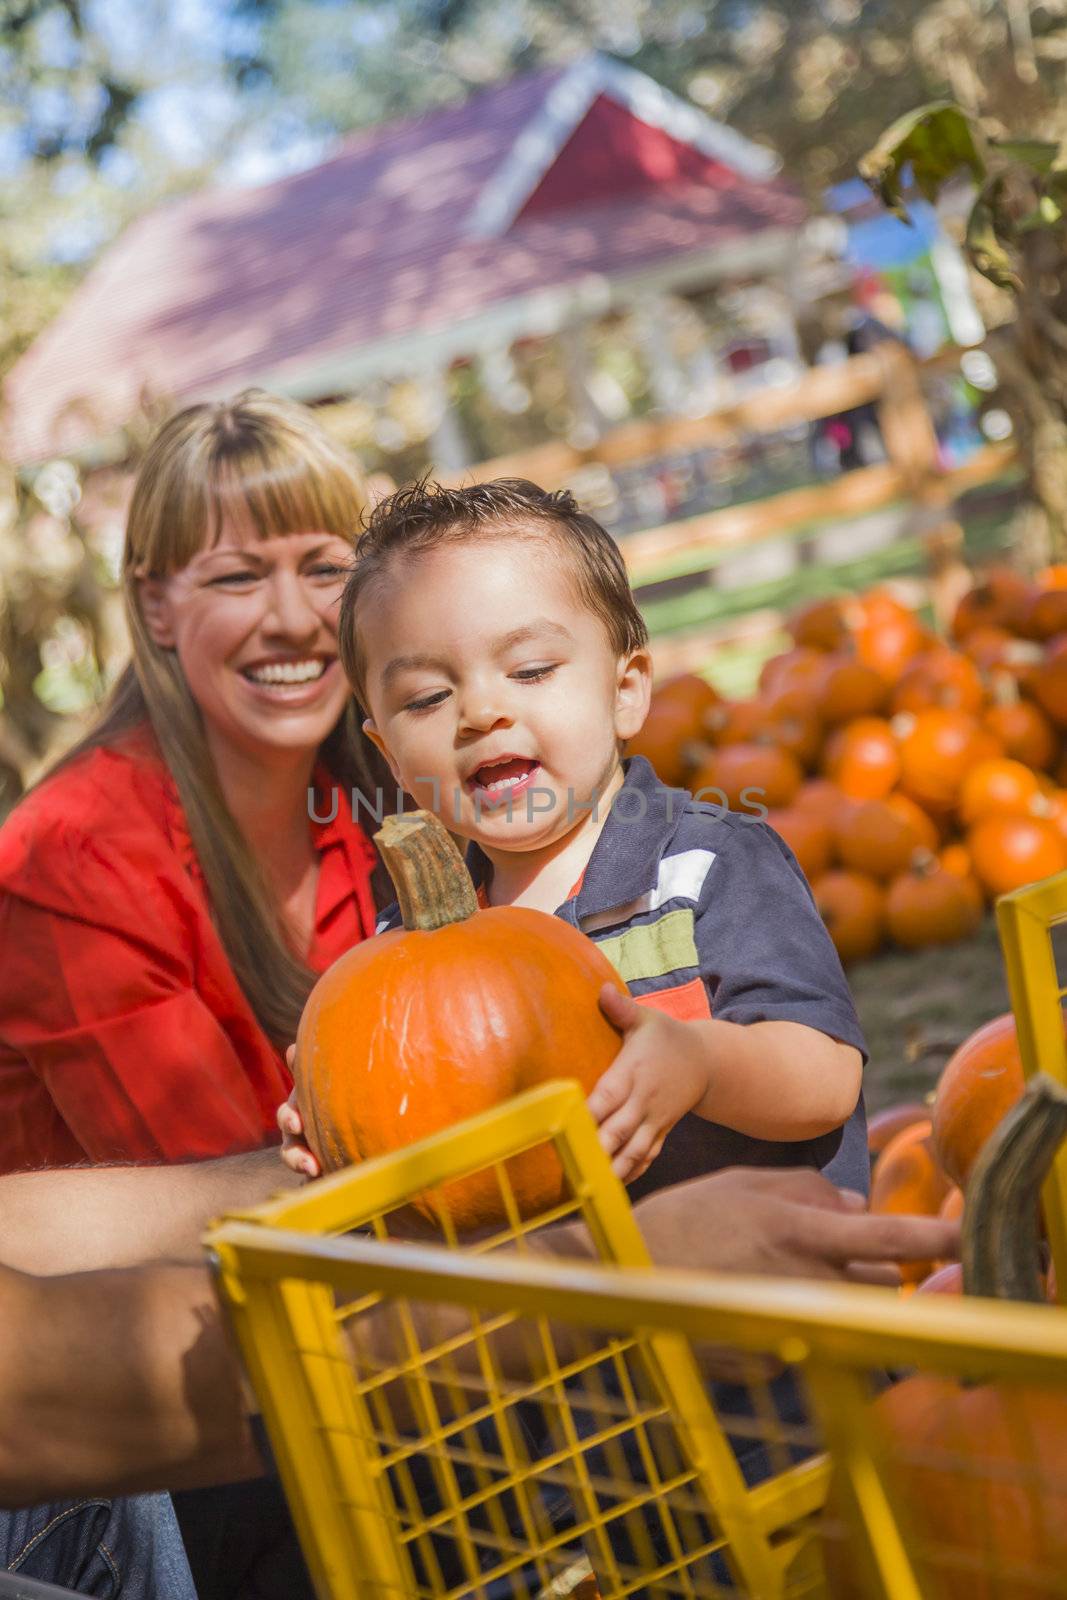 Happy Mixed Race Family Picking Pumpkins at the Pumpkin Patch.